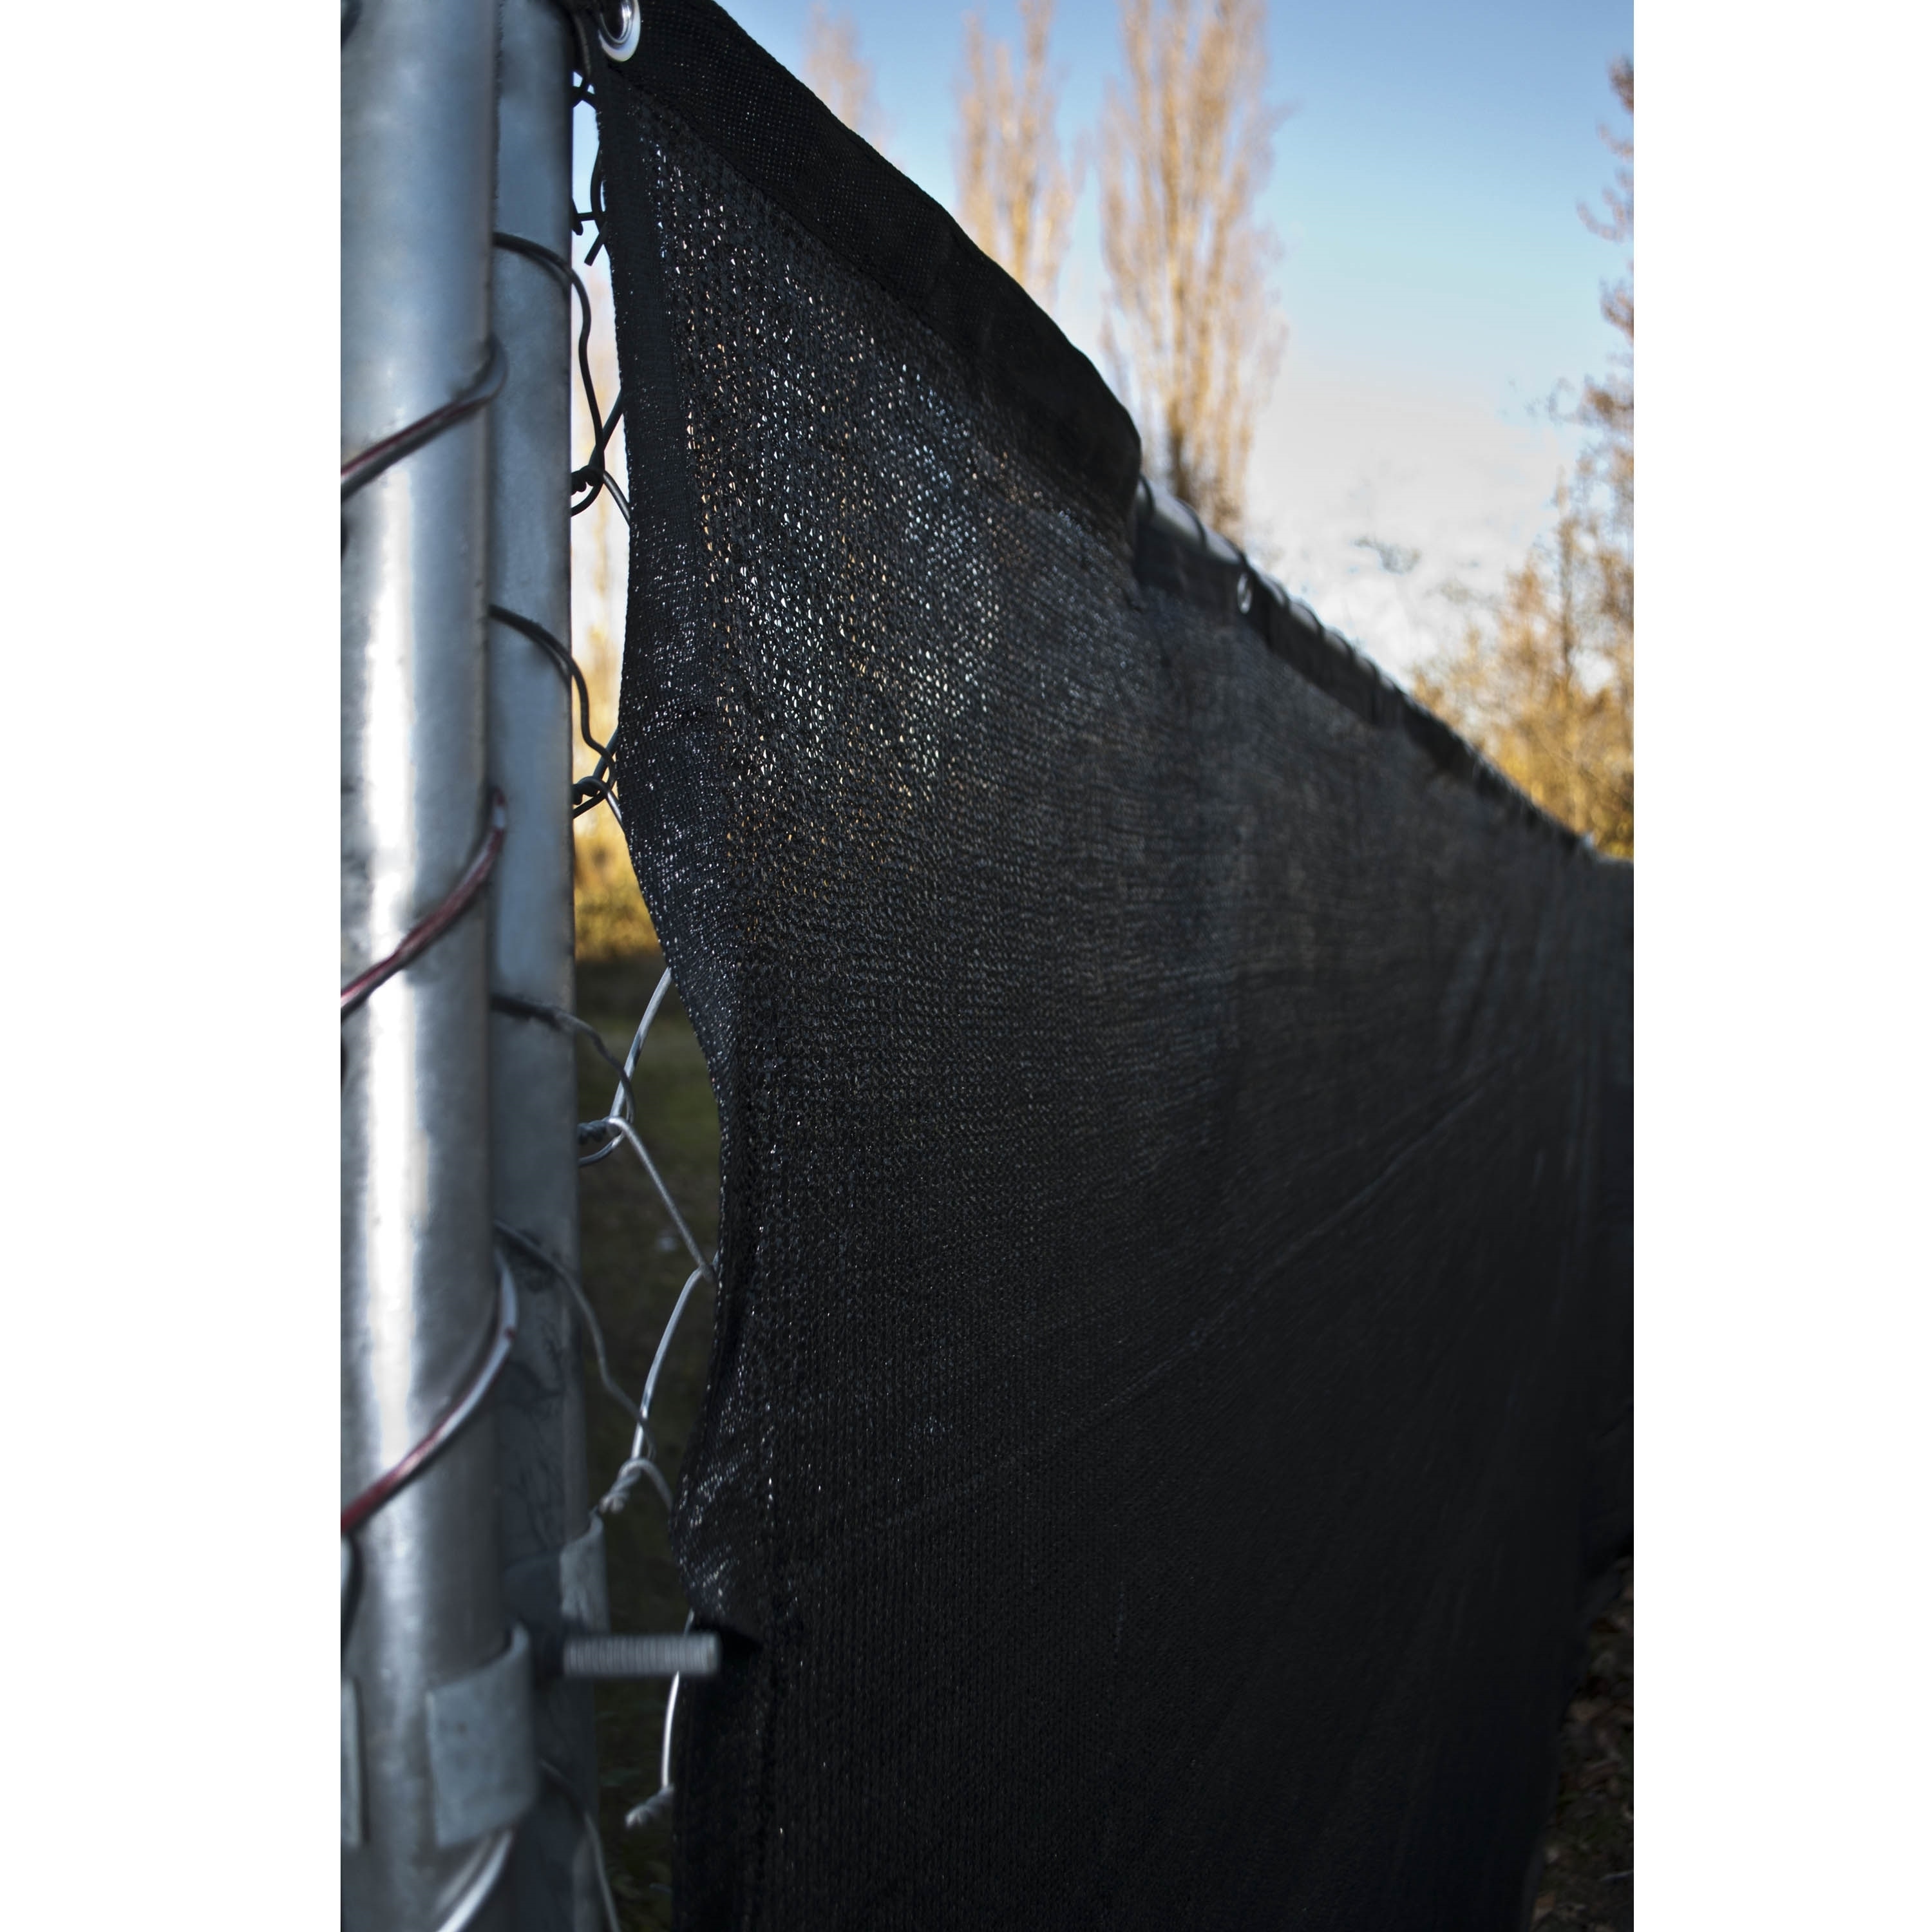 ALEKO Fence Privacy Screen With Grommets Outdoor Windscreen 5 x 50 Ft Black 